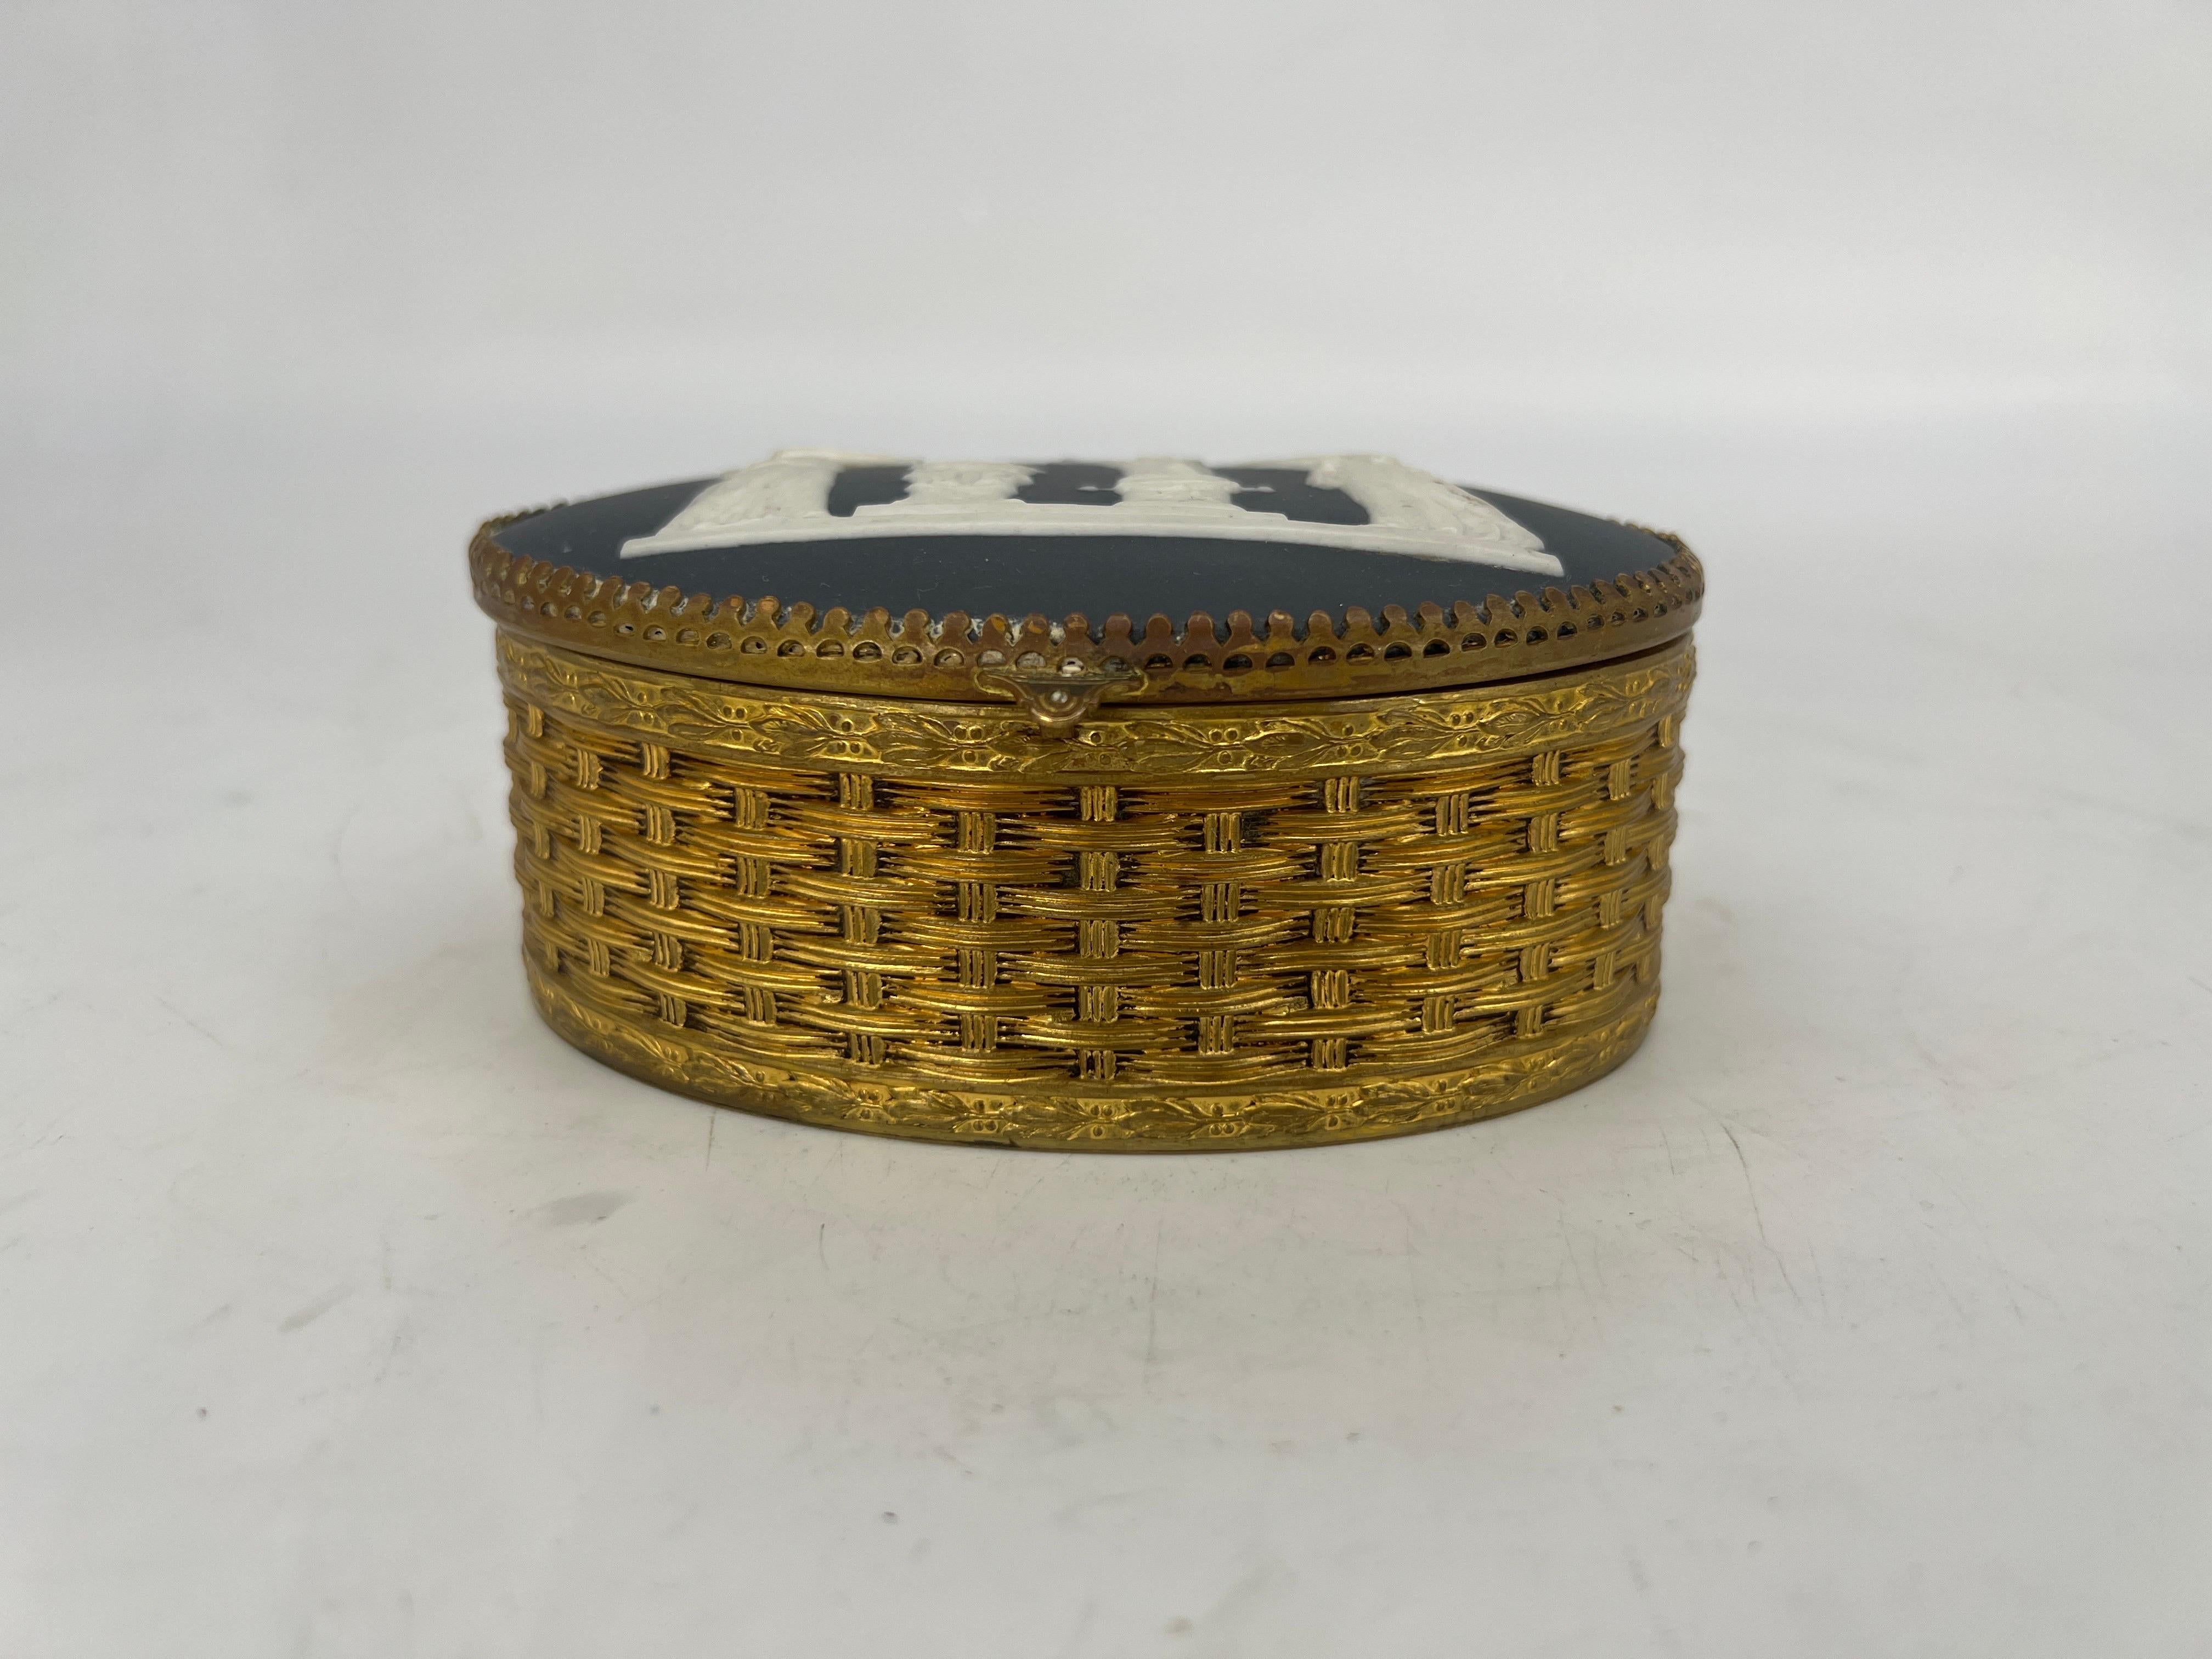 Continental, early 20th century.

A antique oval box made of brass and other metals. The box has a basketweave pattern to the exterior and an affixed basalt plaque to the top. The plaque has not been taken off the box to examine the maker. Otherwise